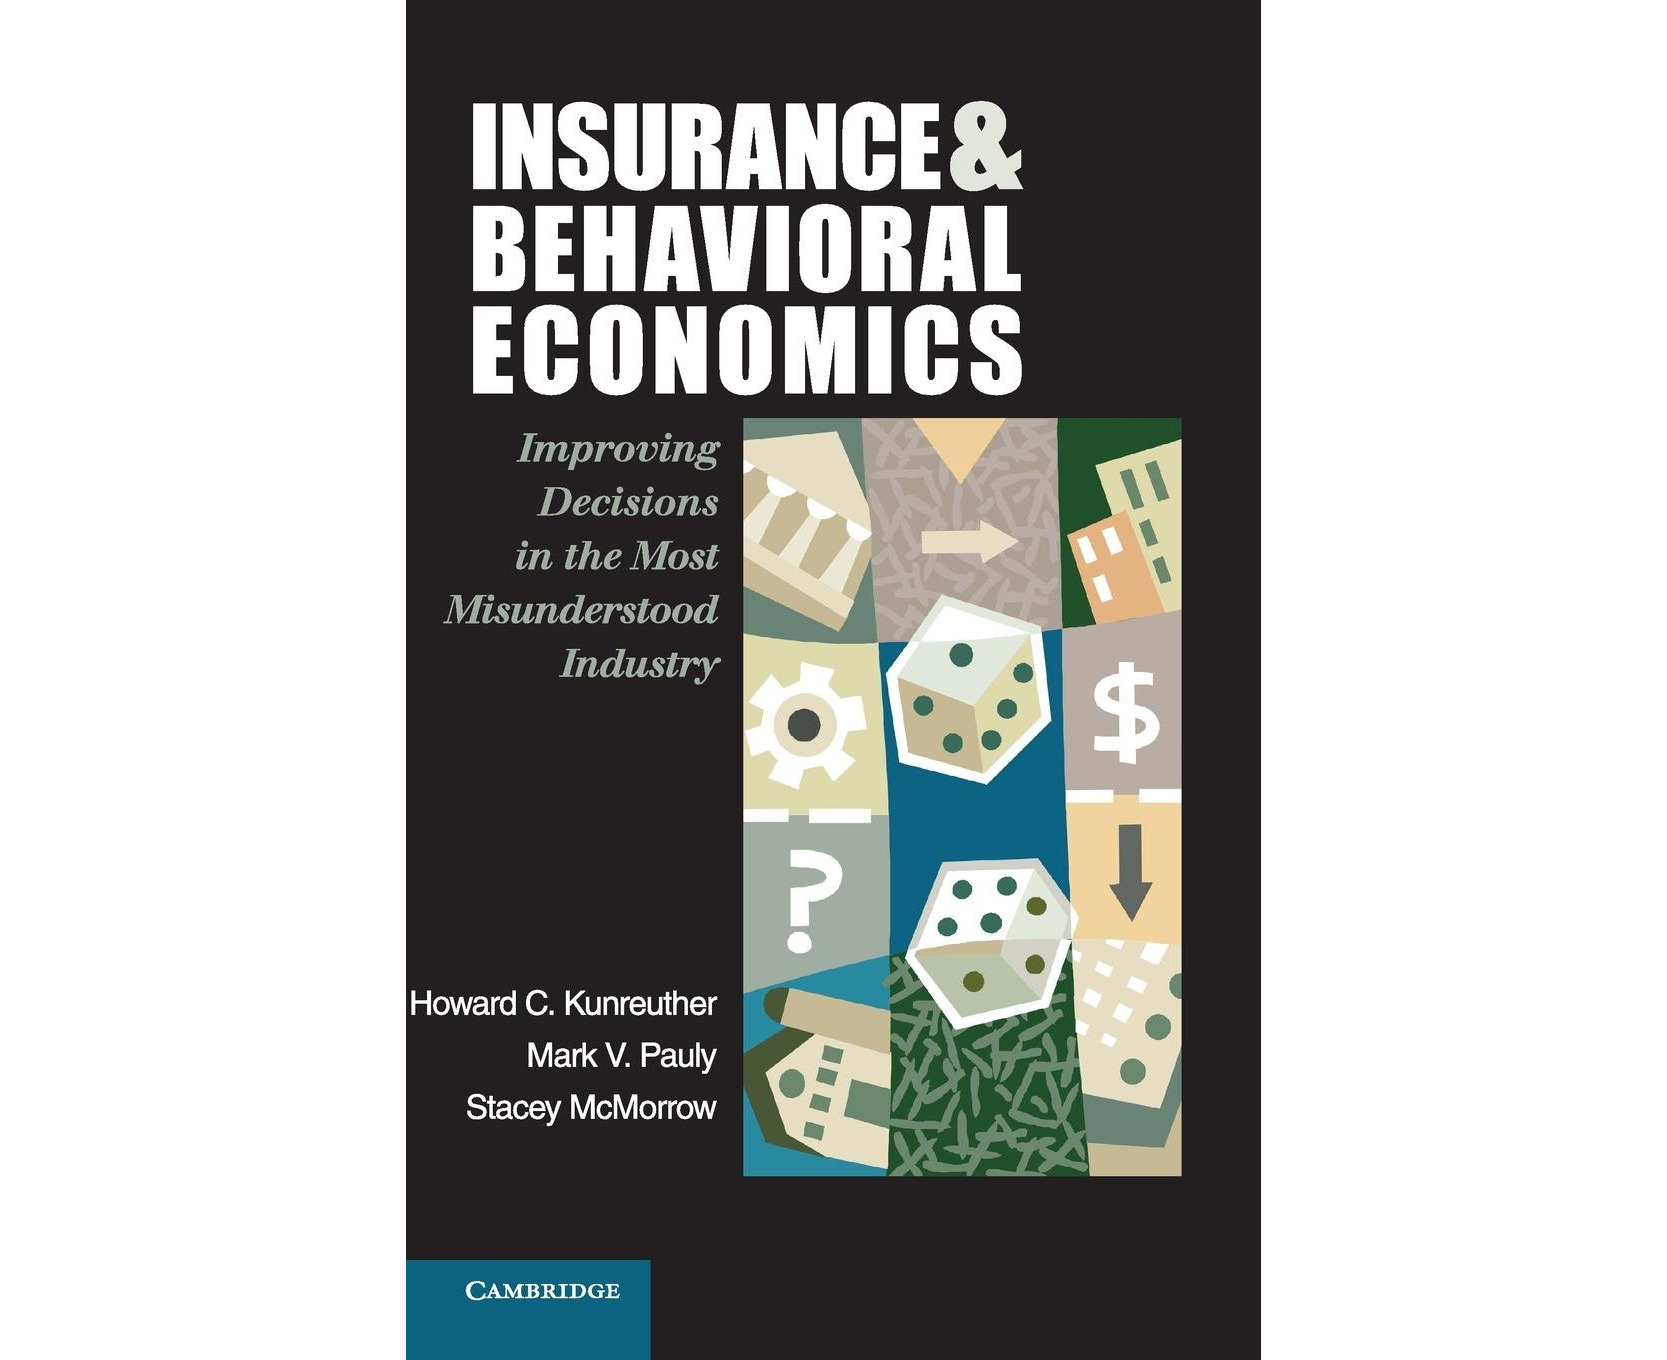 the　Misunderstood　Most　in　Insurance　Decisions　Improving　Economics:　Behavioral　and　Industry